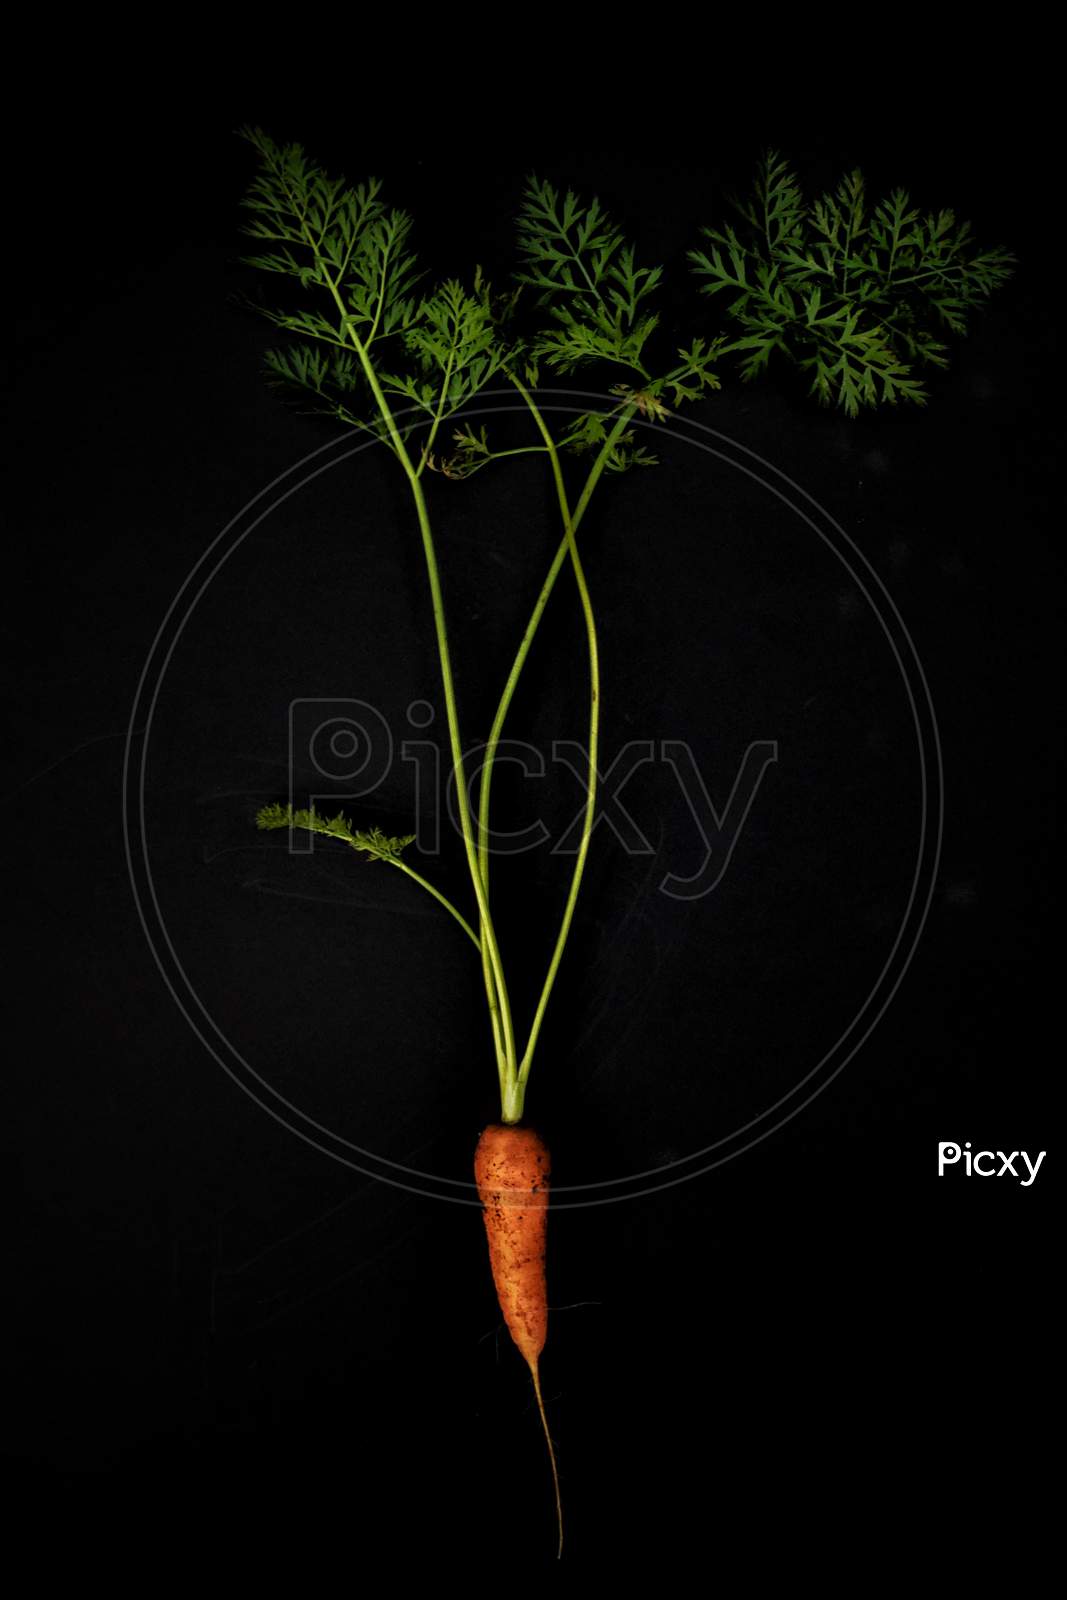 This is a carrot image closeup with black background